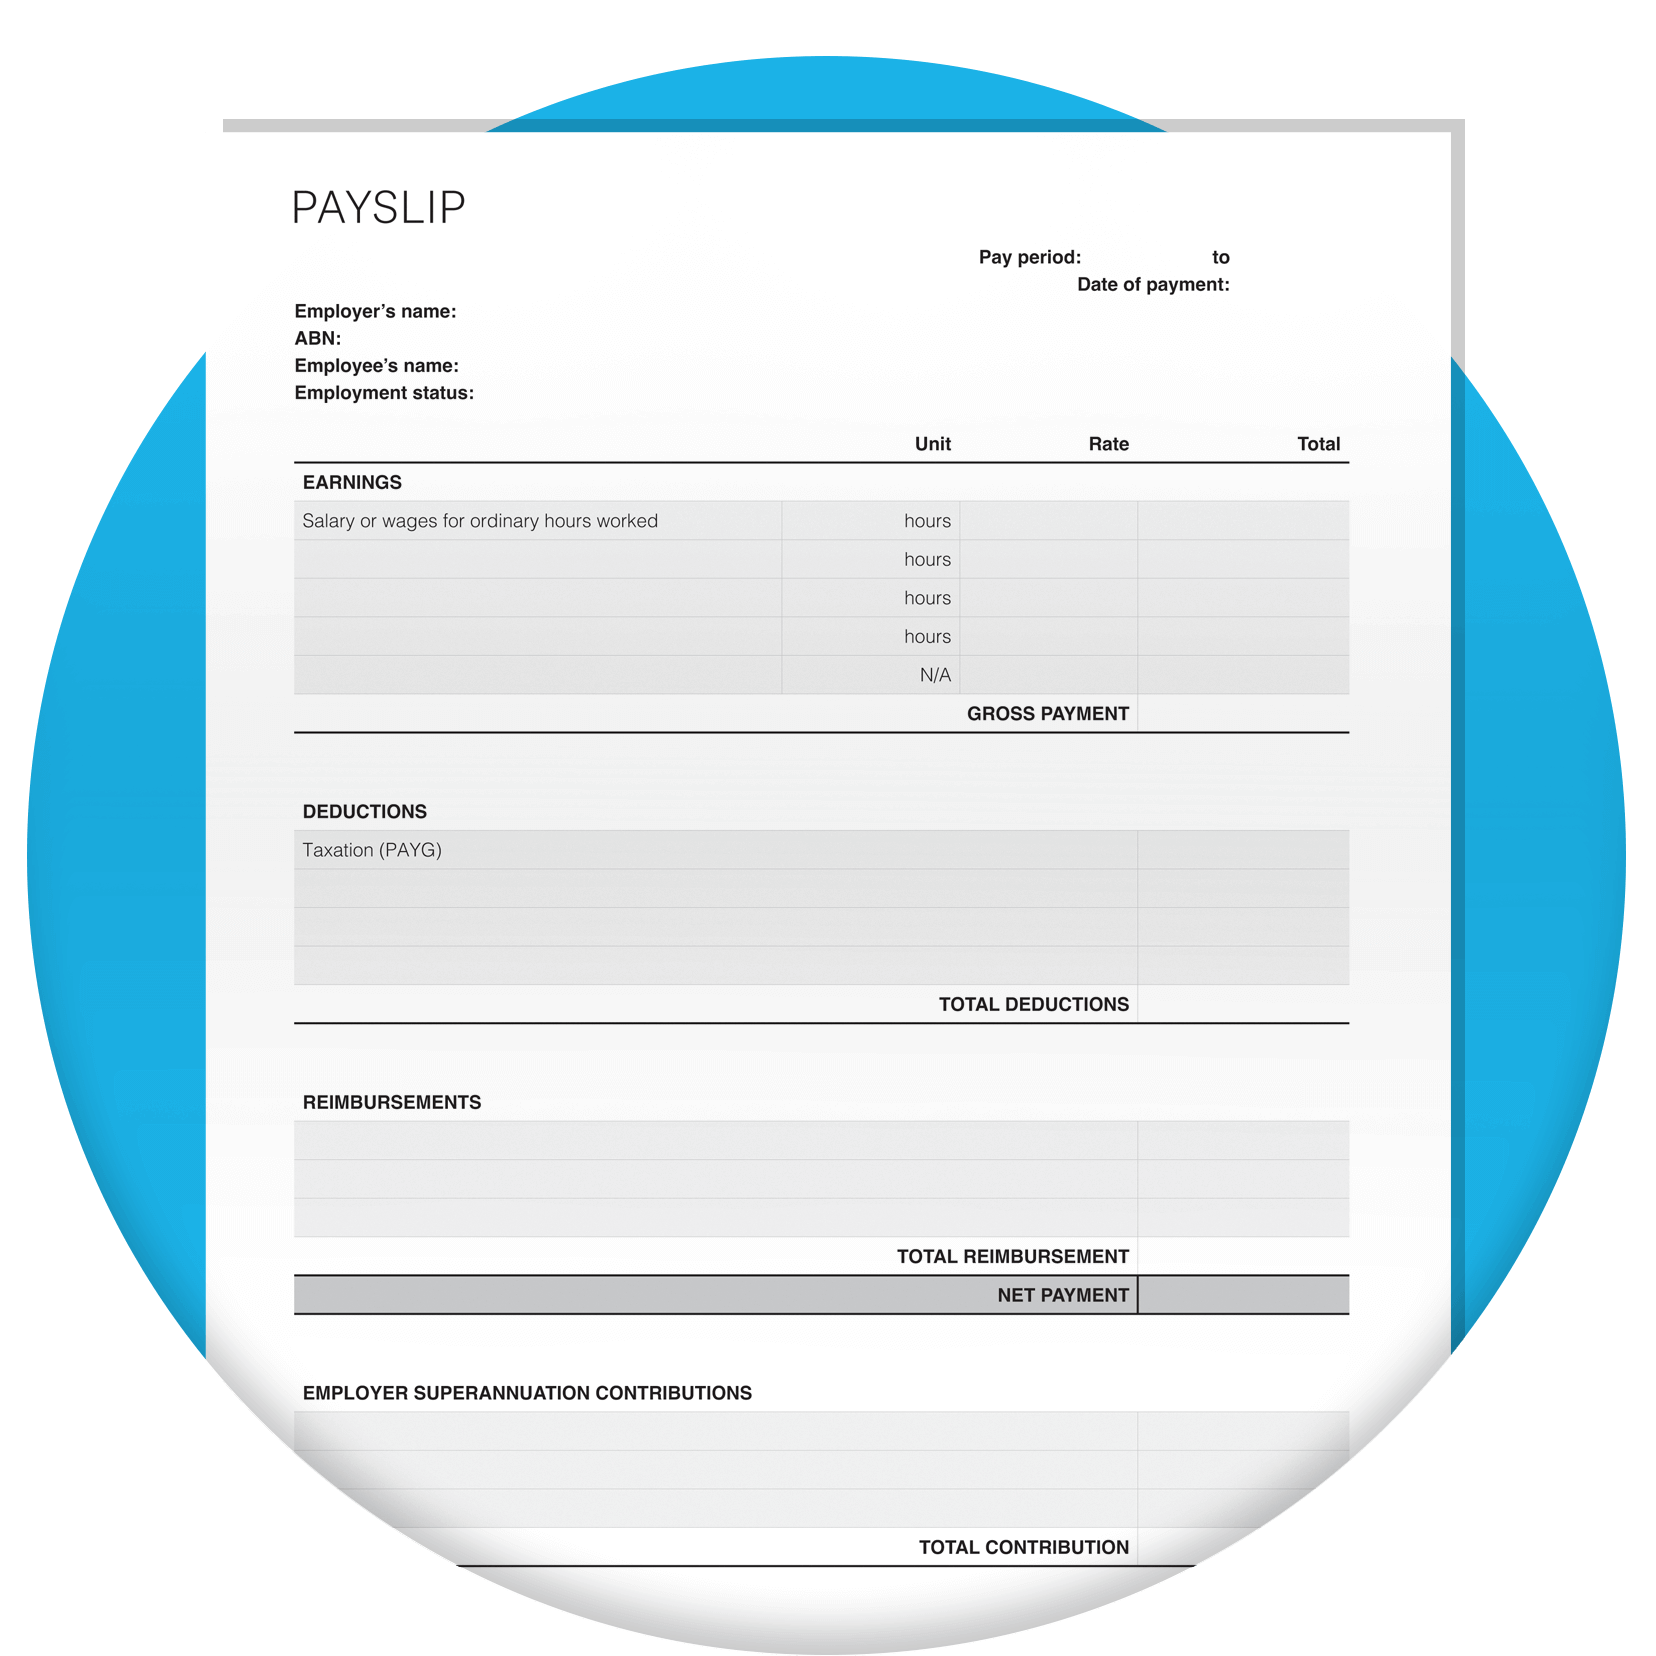 Payslip template with blank fields for users to fill out.